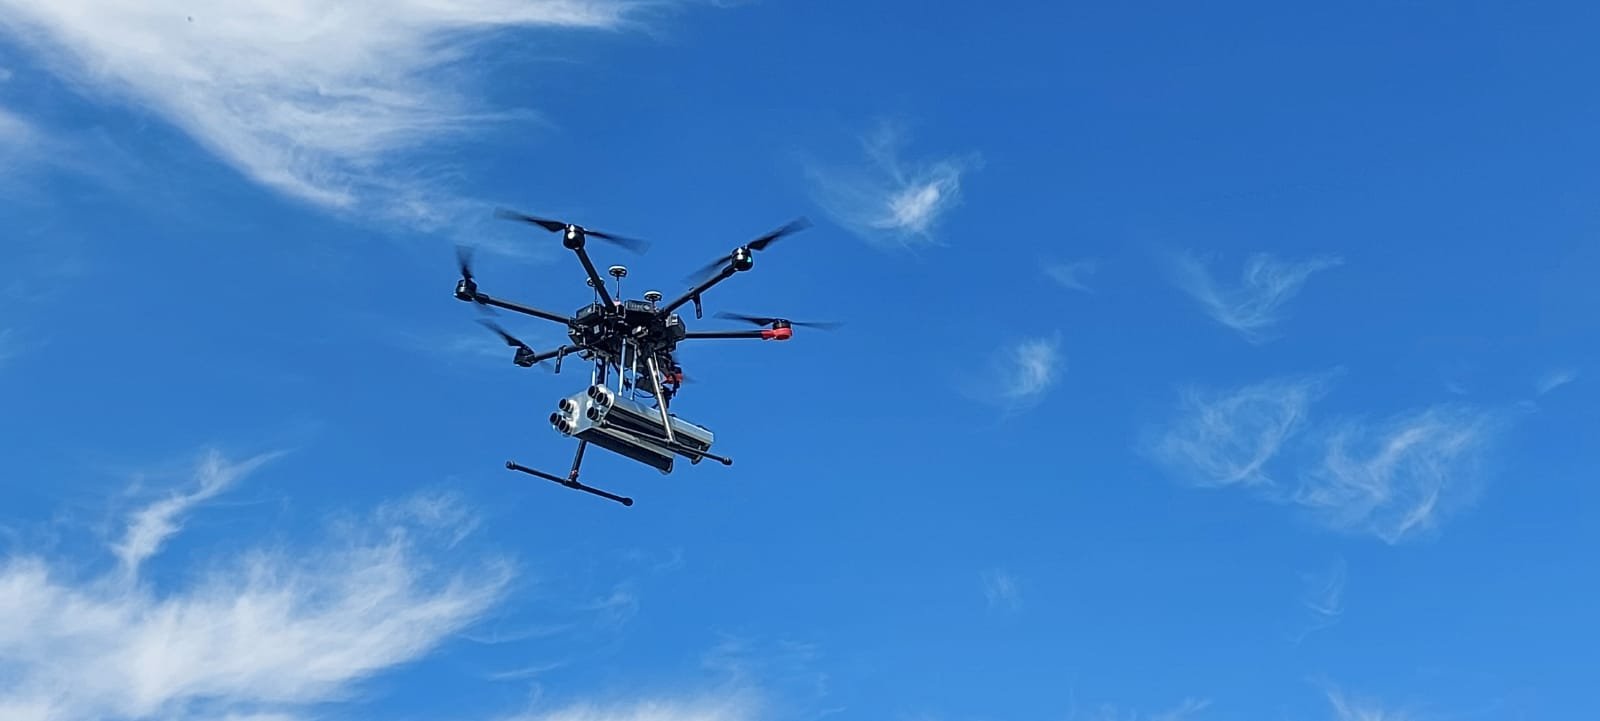 A mini drone carrying Troy Teknoloji Savunma ammunition is seen in the photo provided on May 16, 2021. (Photo by Troy Teknoloji Savunma via AA)